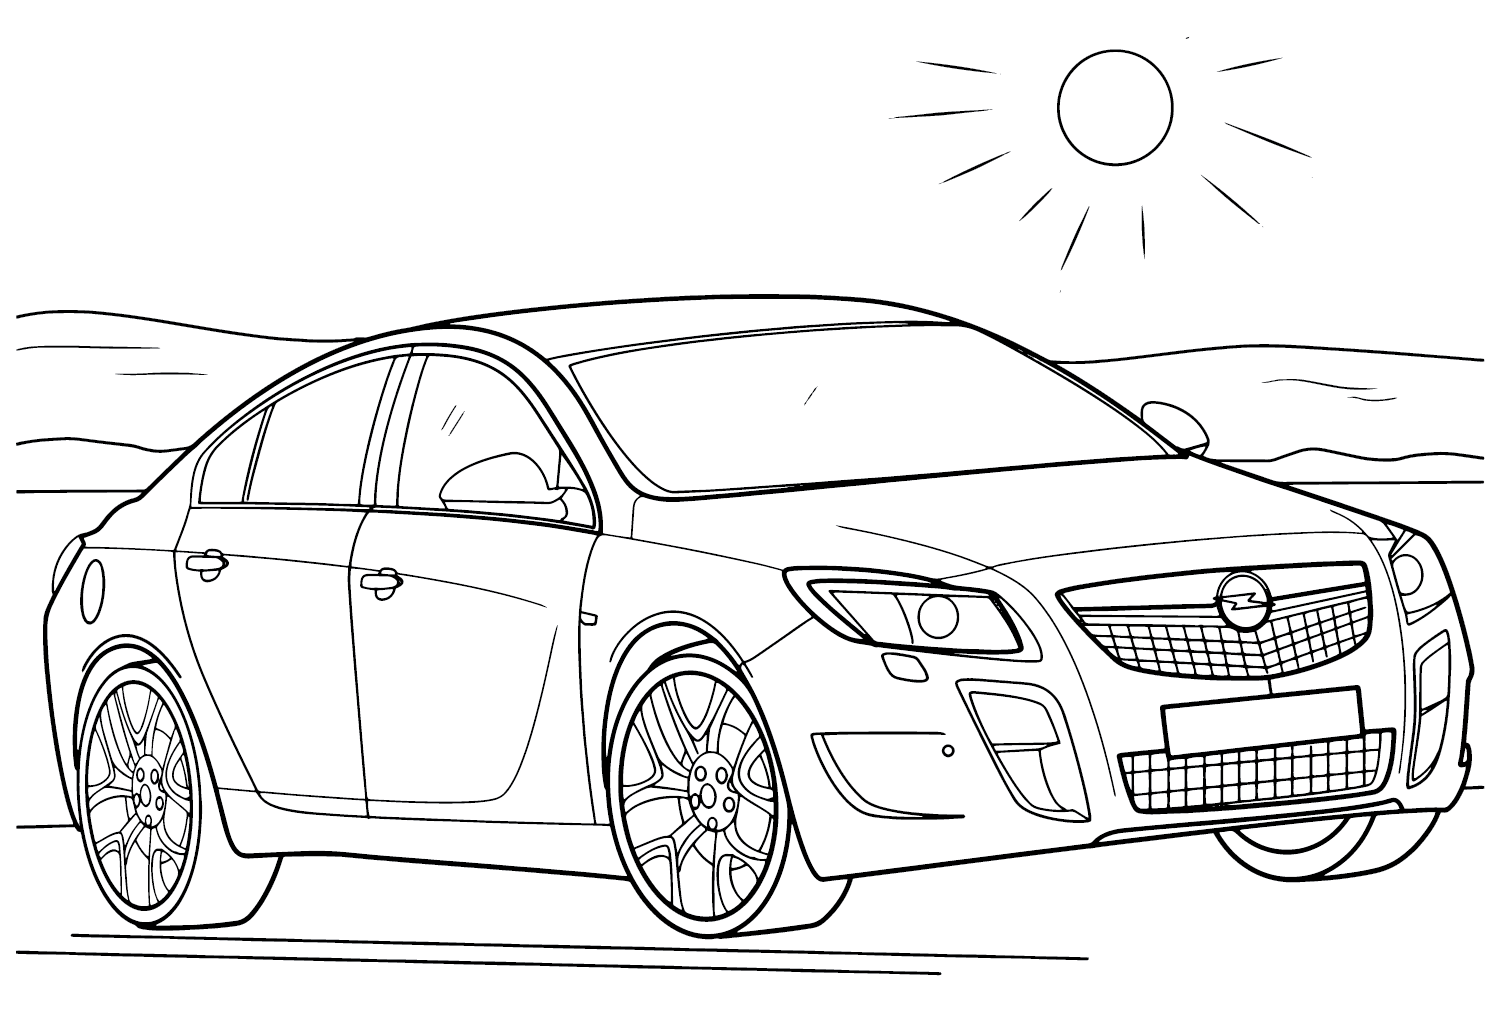 Opel Insignia Coloring Page Free from Opel